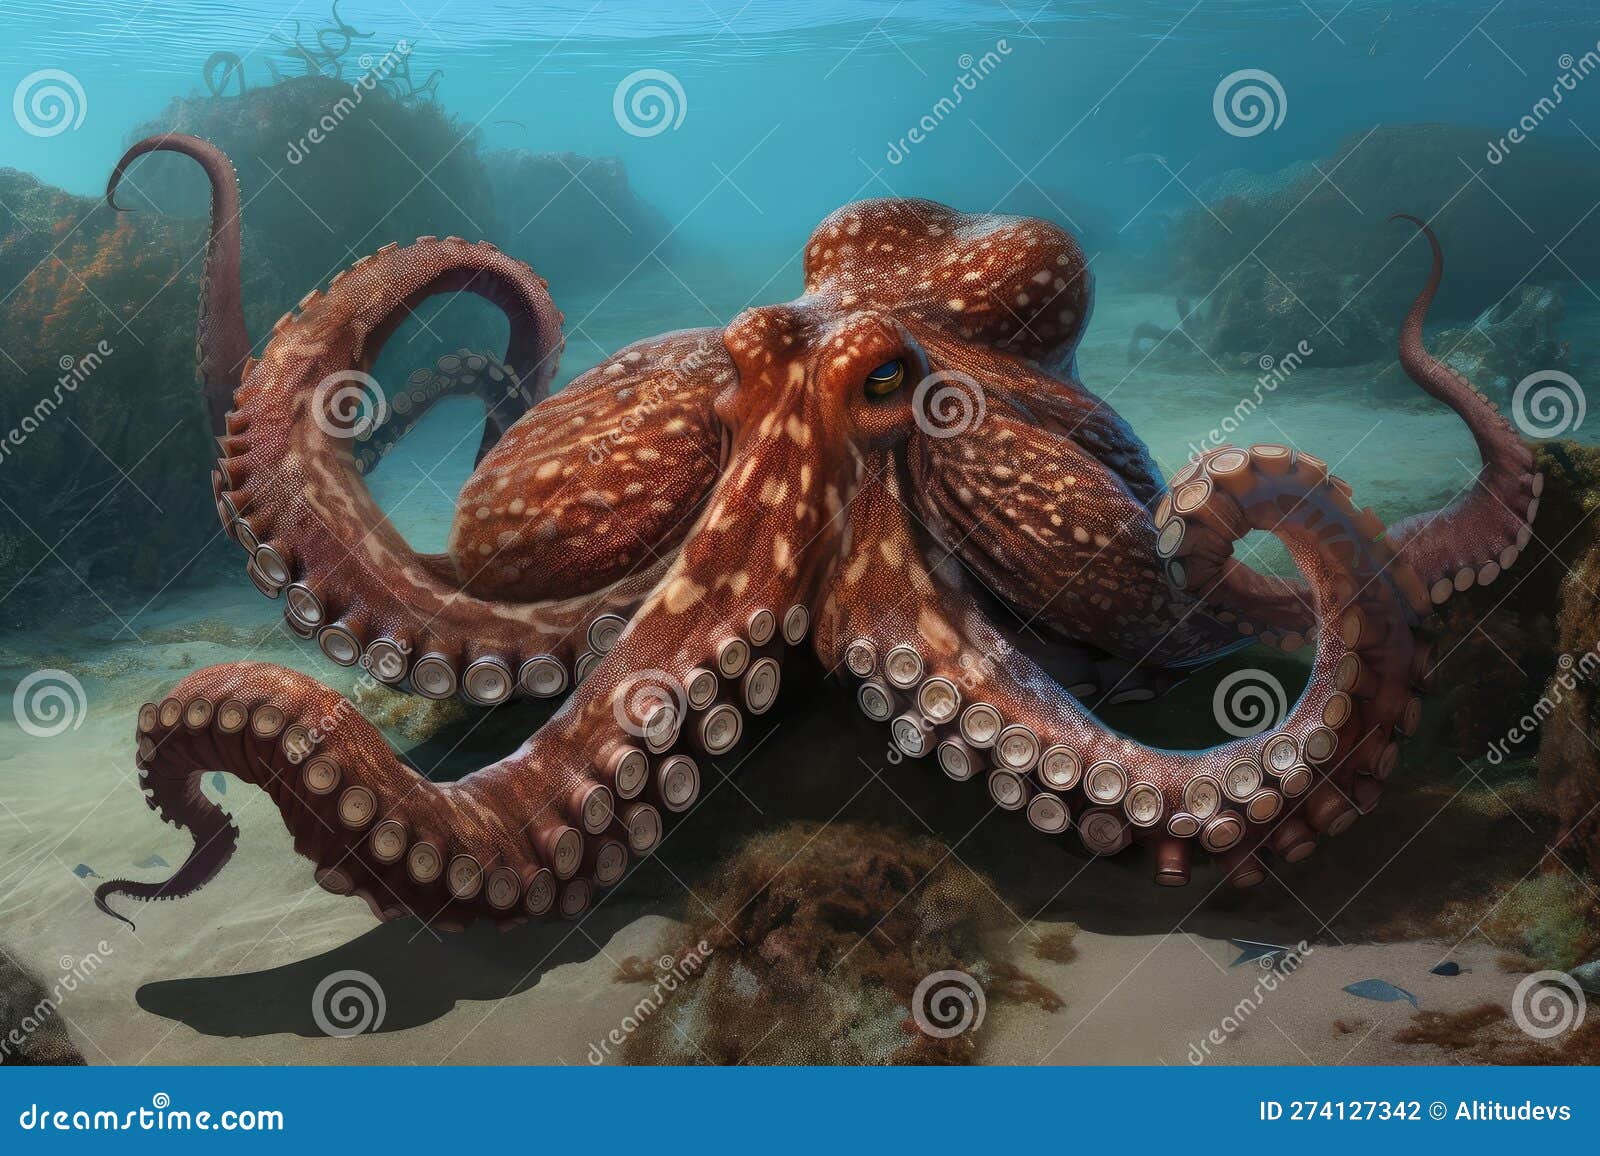 Giant Octopus, Spreading Its Tentacles and Attacking with Its Beak